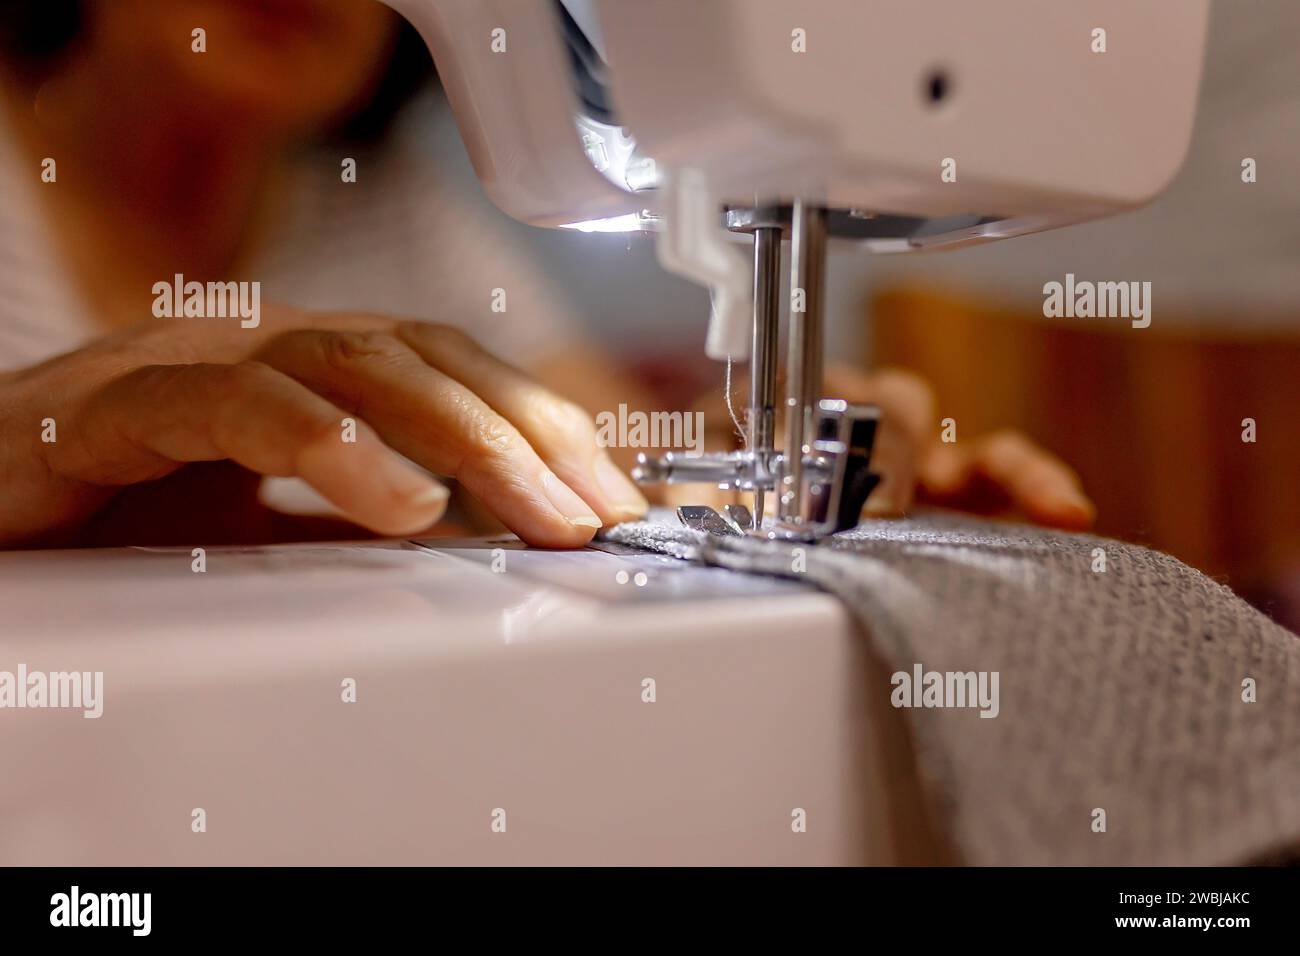 Woman, sewing small pillows on a sewing machine at home Stock Photo